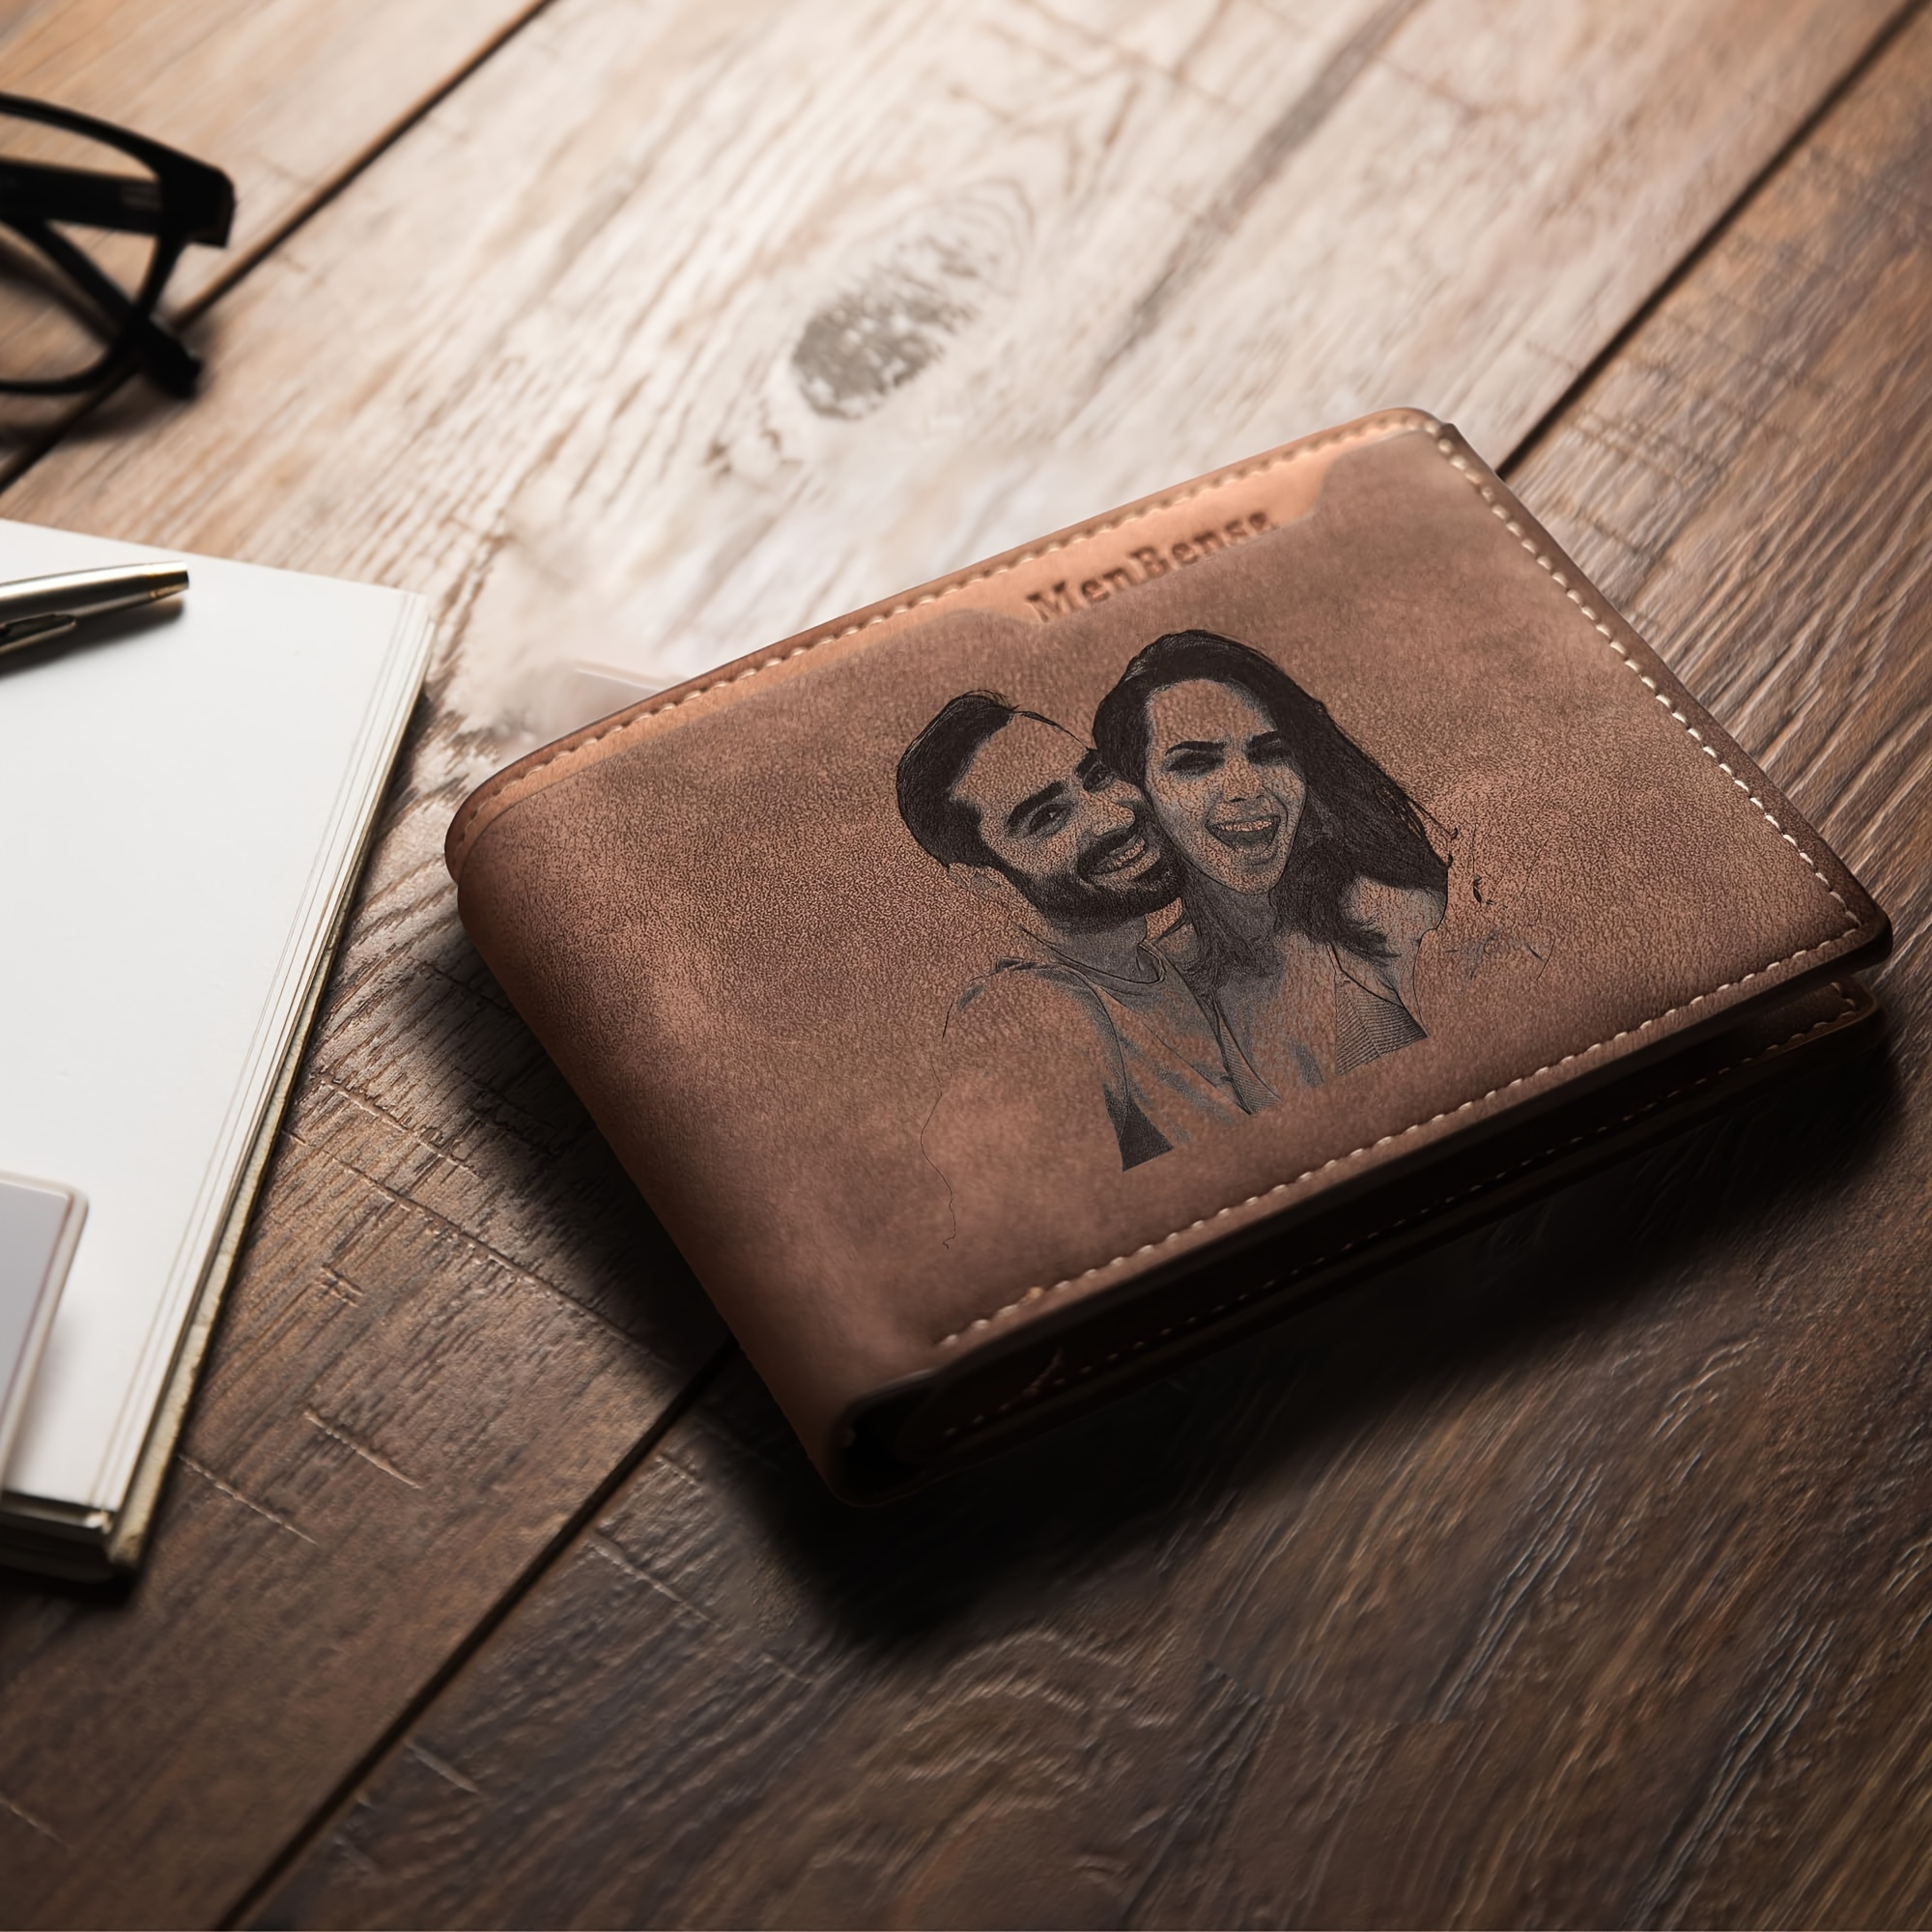 

Men's Wallet, Personalized Photo, For Boyfriends, Husbands, Dads, For Valentine's Day, Anniversary, Birthday Gifts